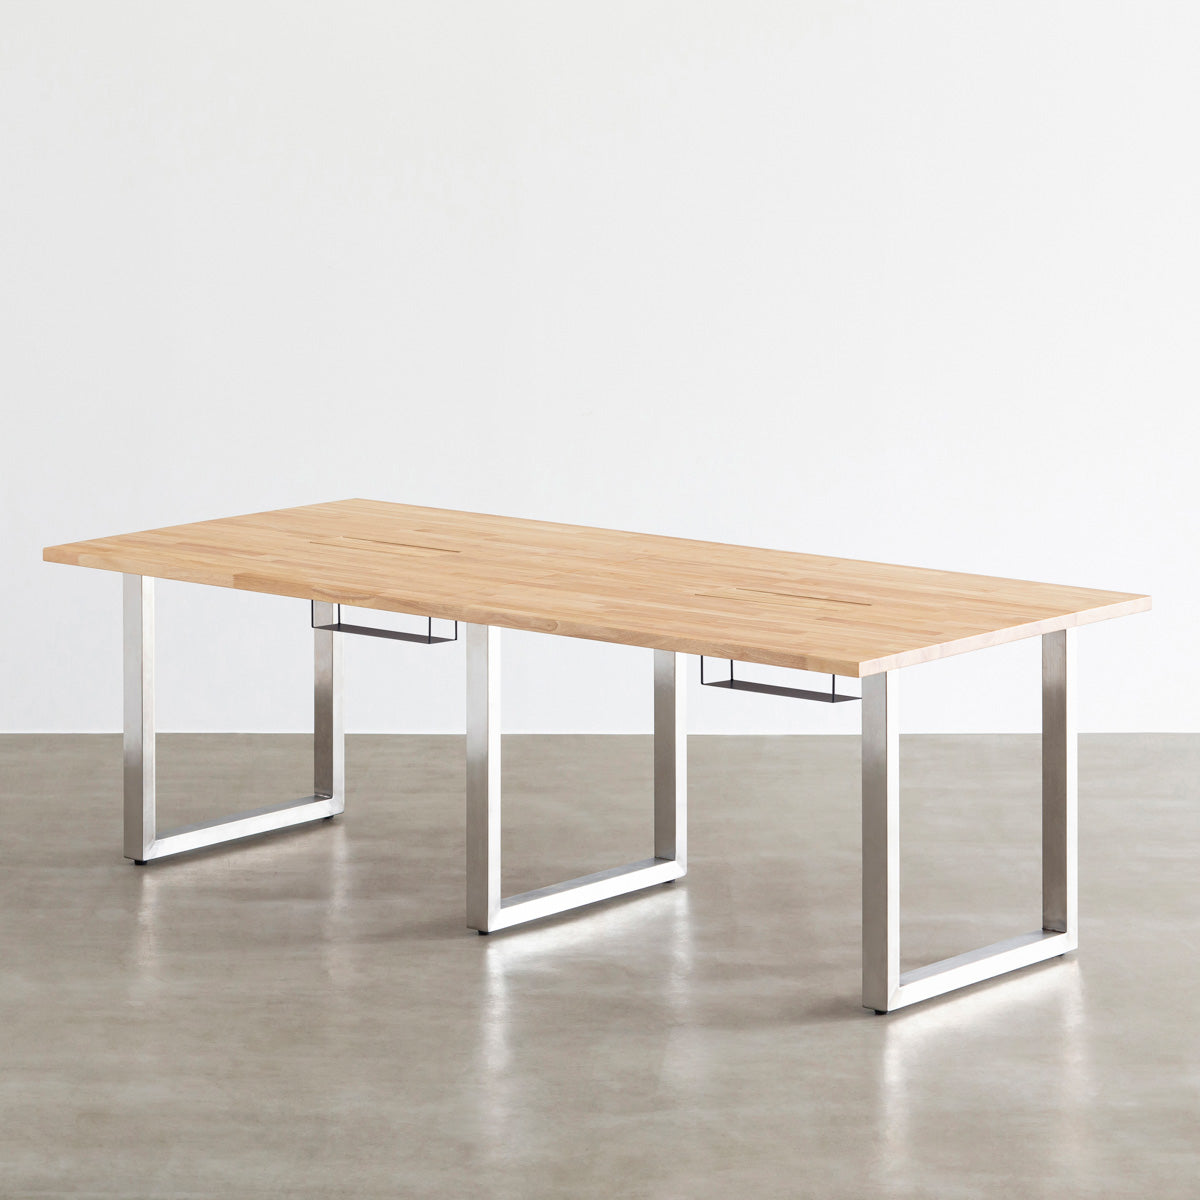 THE TABLE / ラバーウッド ナチュラル × Stainless × W181 - 300cm 